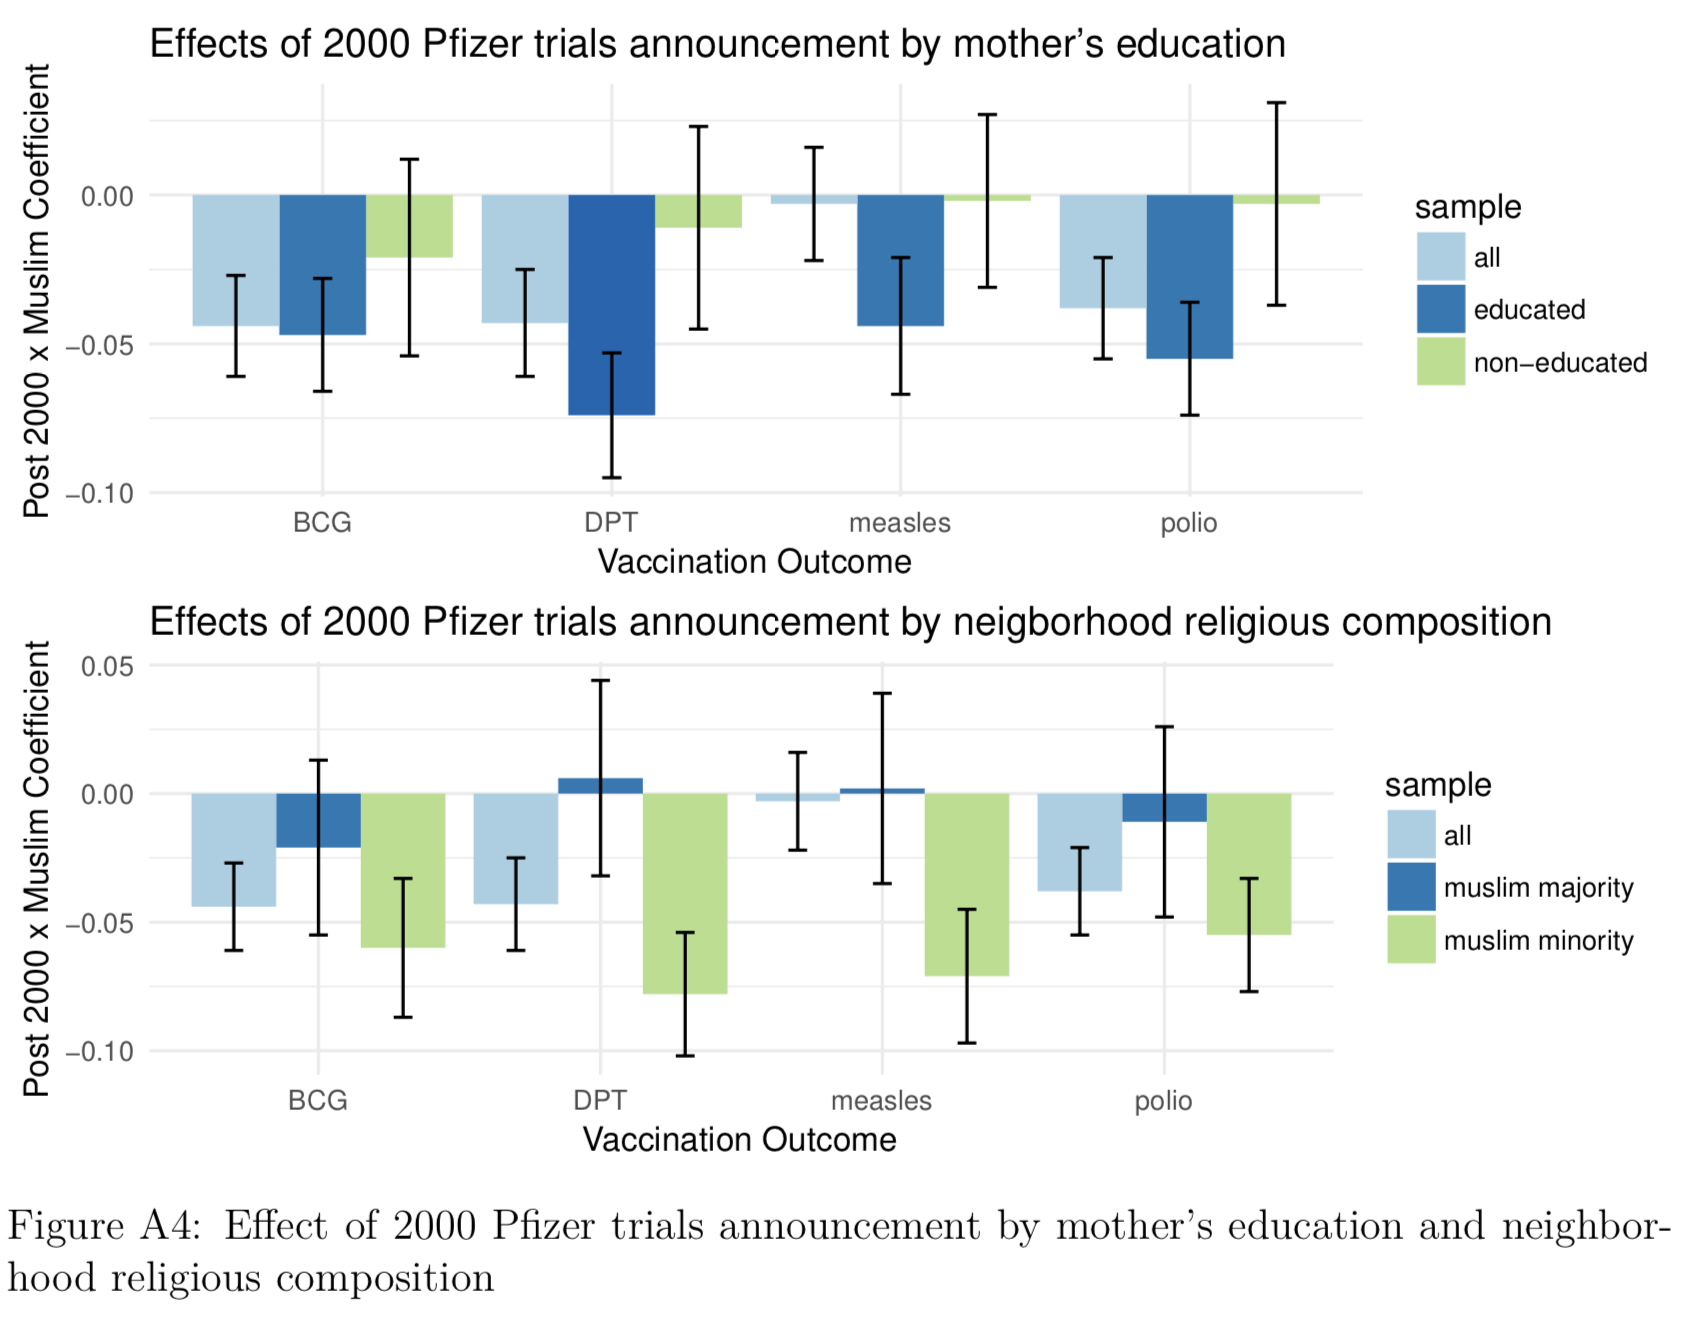 Effect of 2000 Pfizer trials announcement by mother’s education and neighborhood religious composition